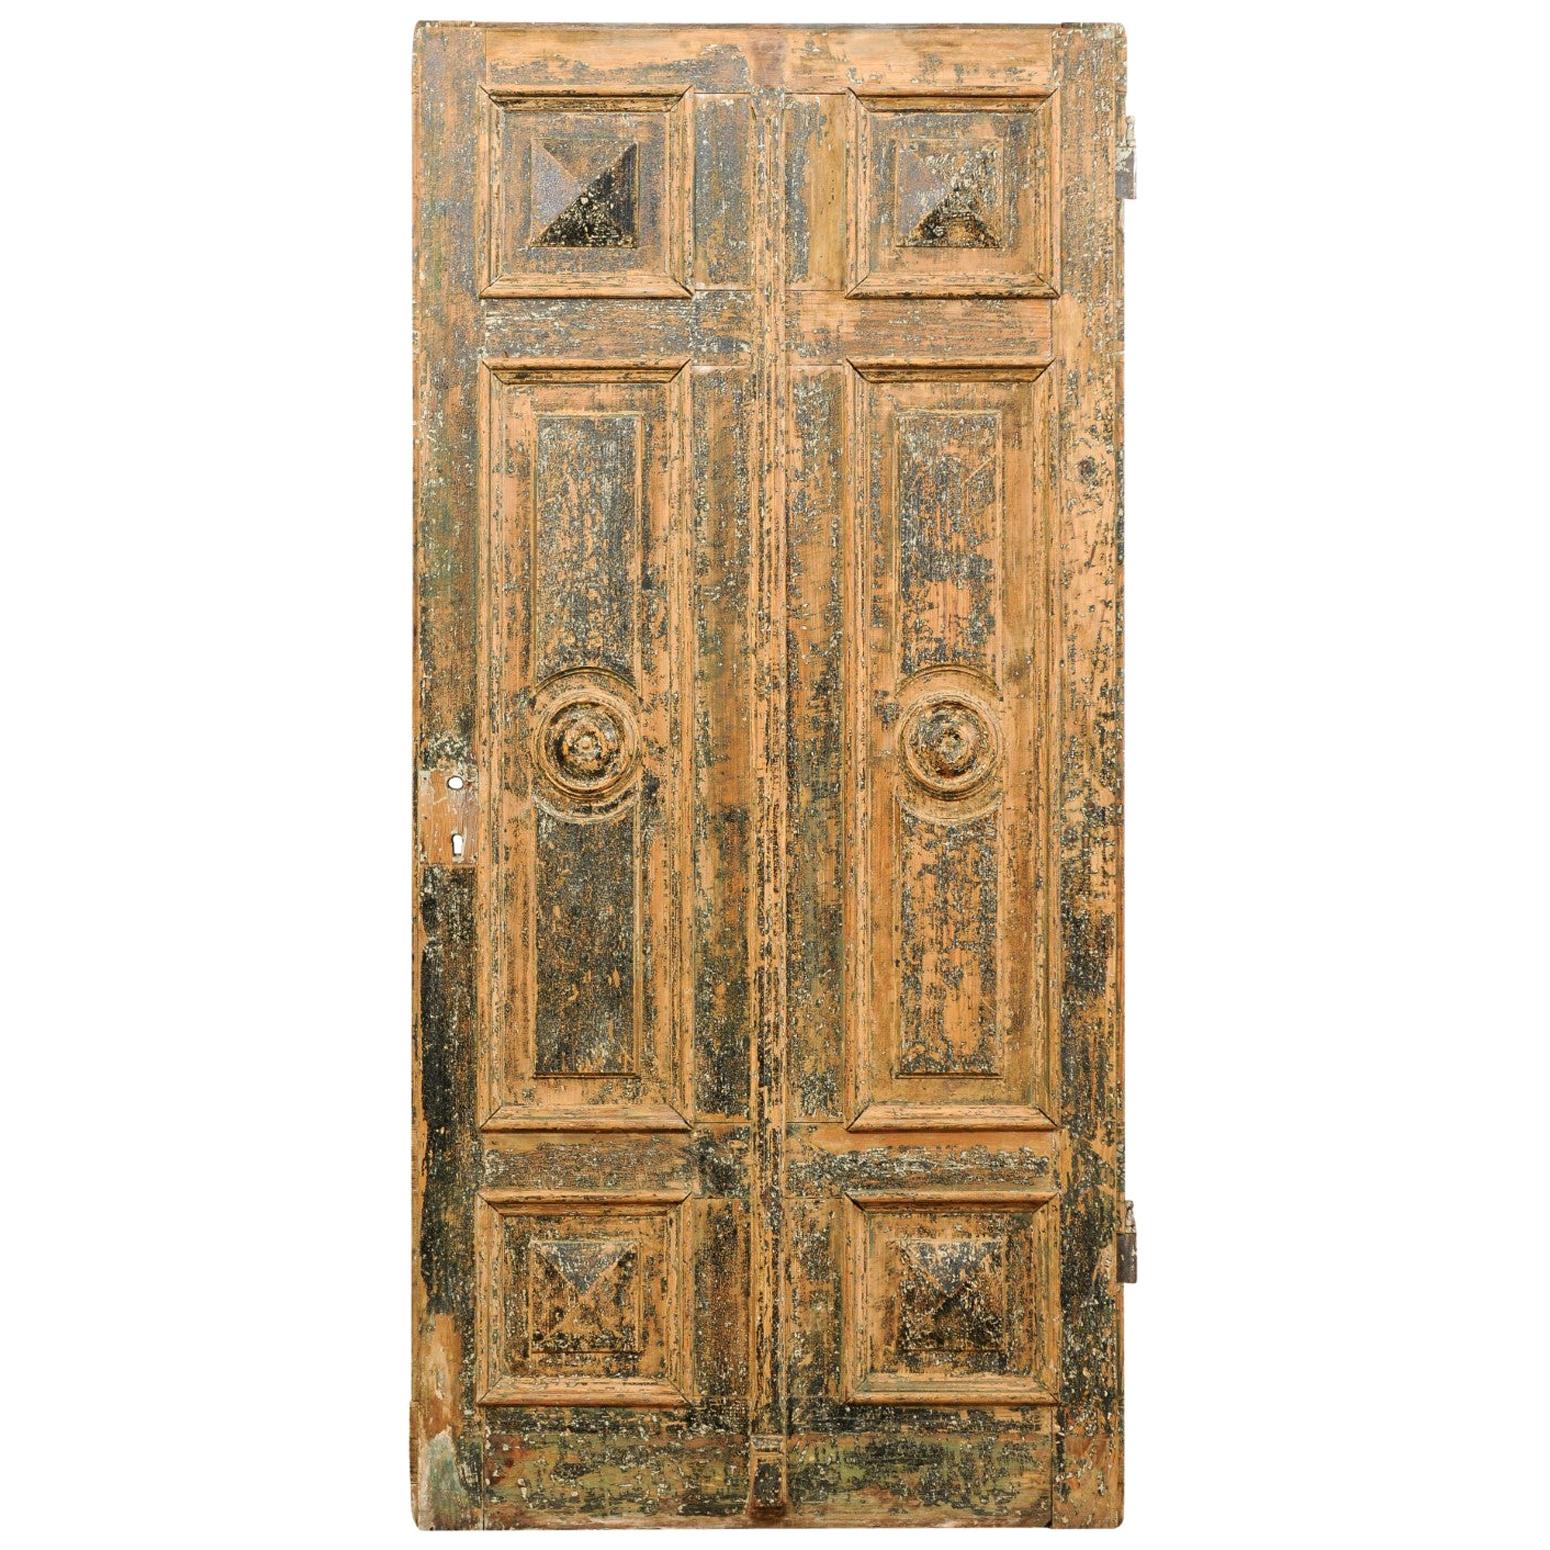 Spanish Single Nicely Carved Raised-Panel Wood Door, Early 19th Century